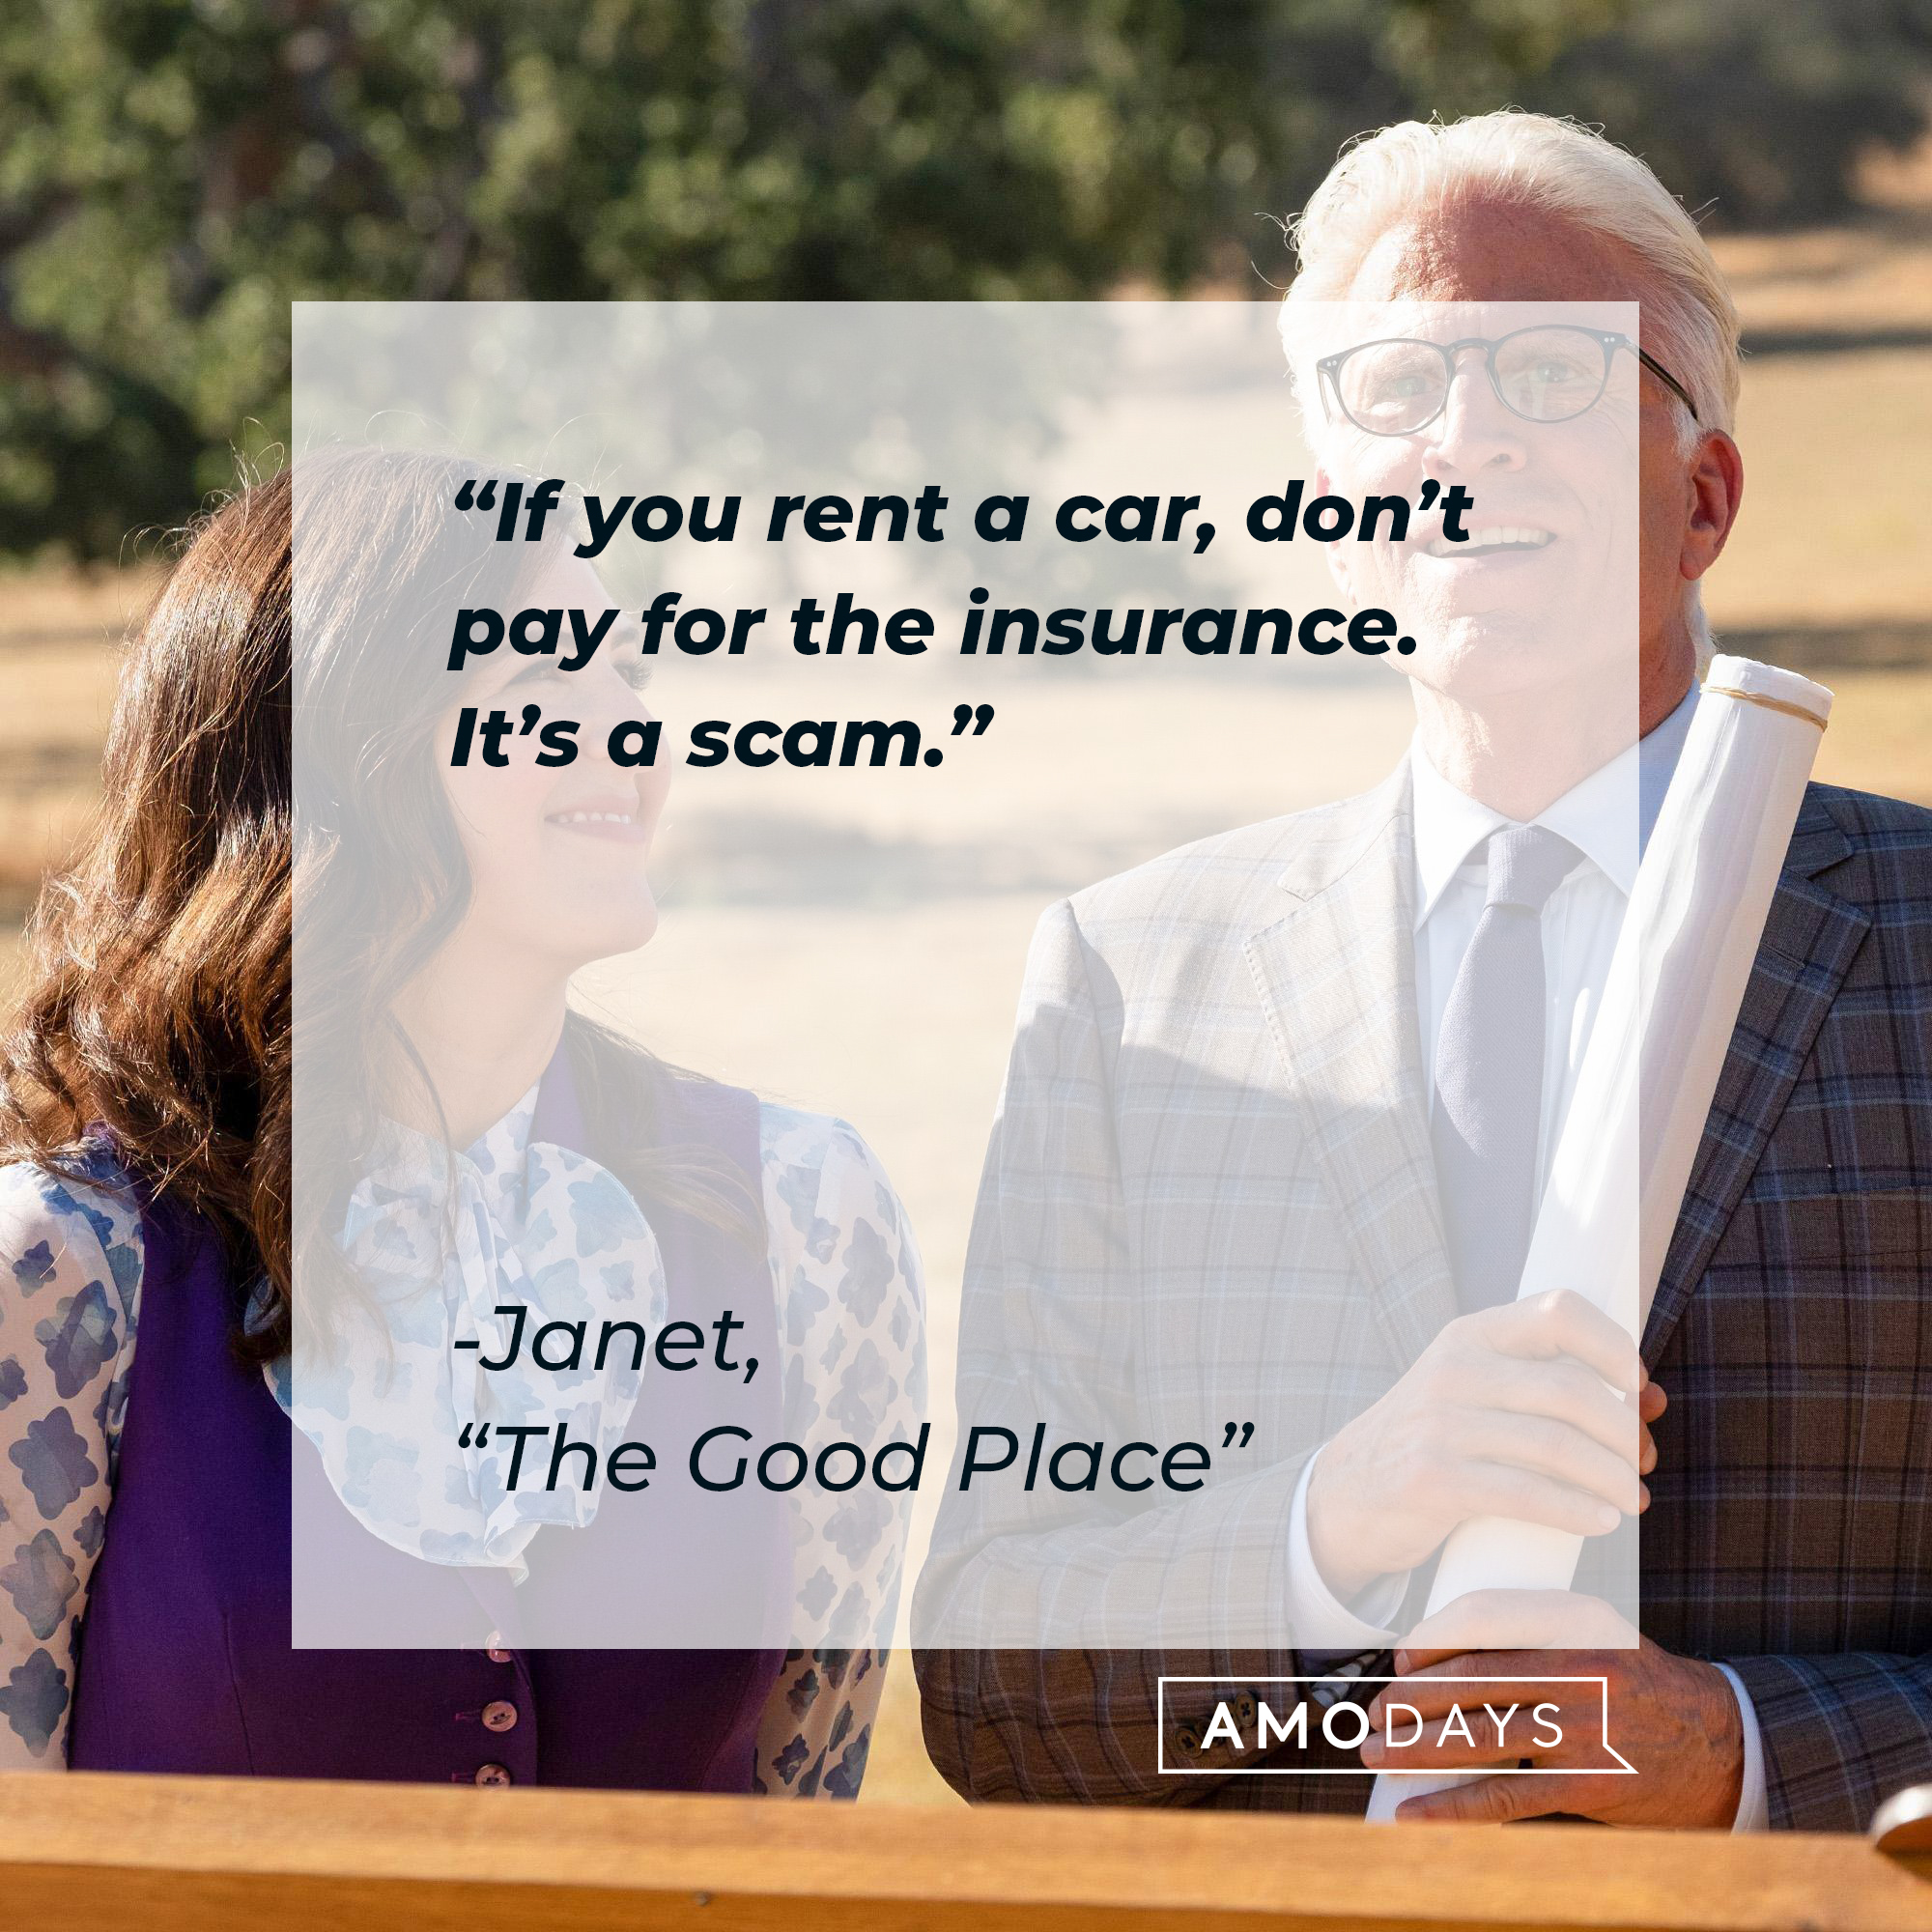 Janet's quote: “If you rent a car, don’t pay for the insurance. It’s a scam.” | Source: facebook.com/NBCTheGoodPlace